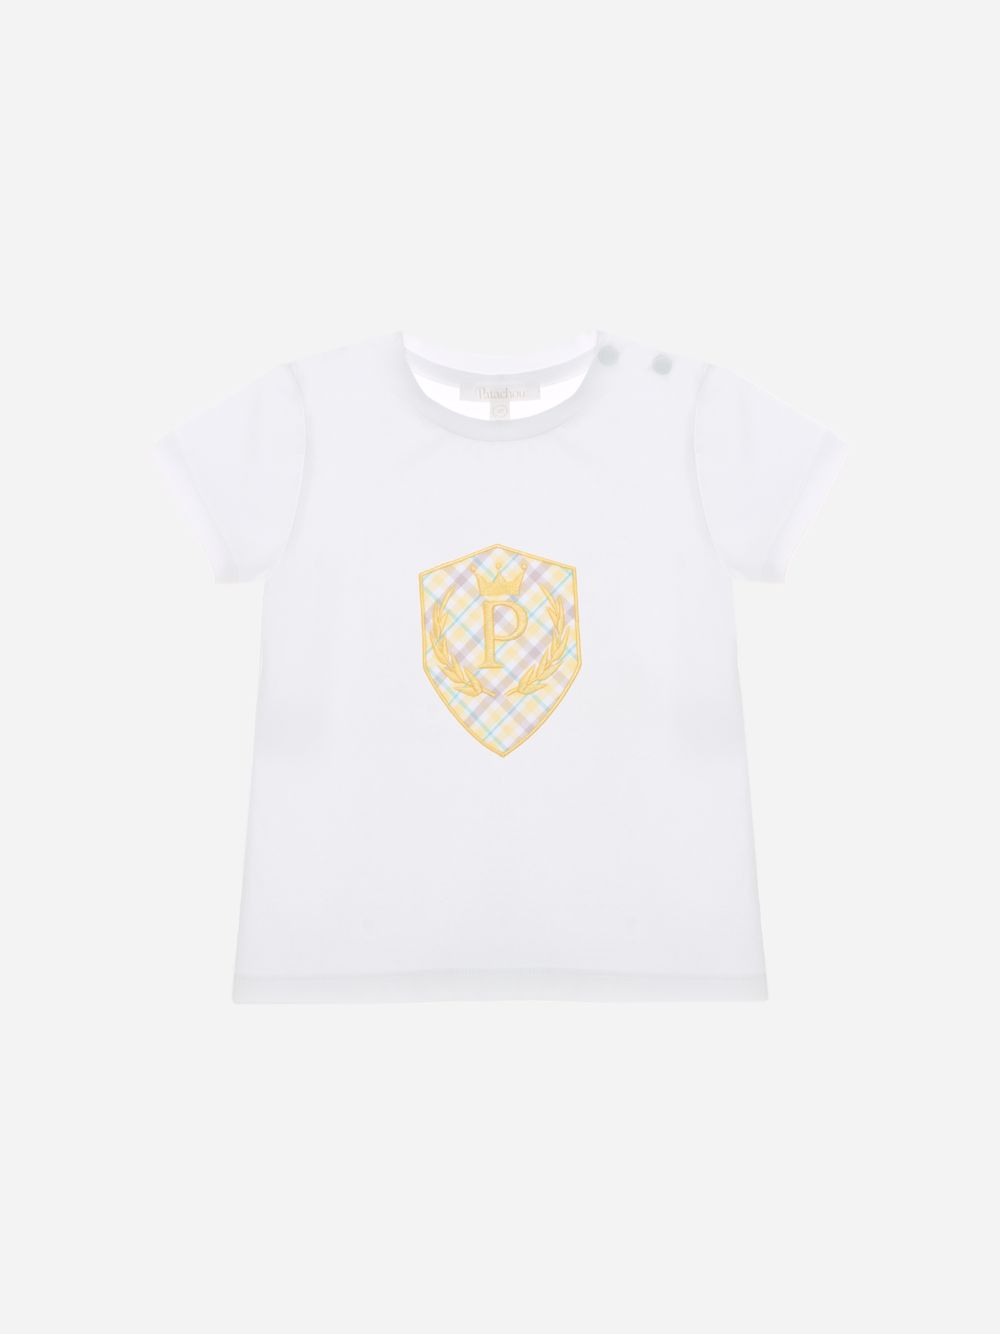 White t-shirt with yellow emblem embroidery